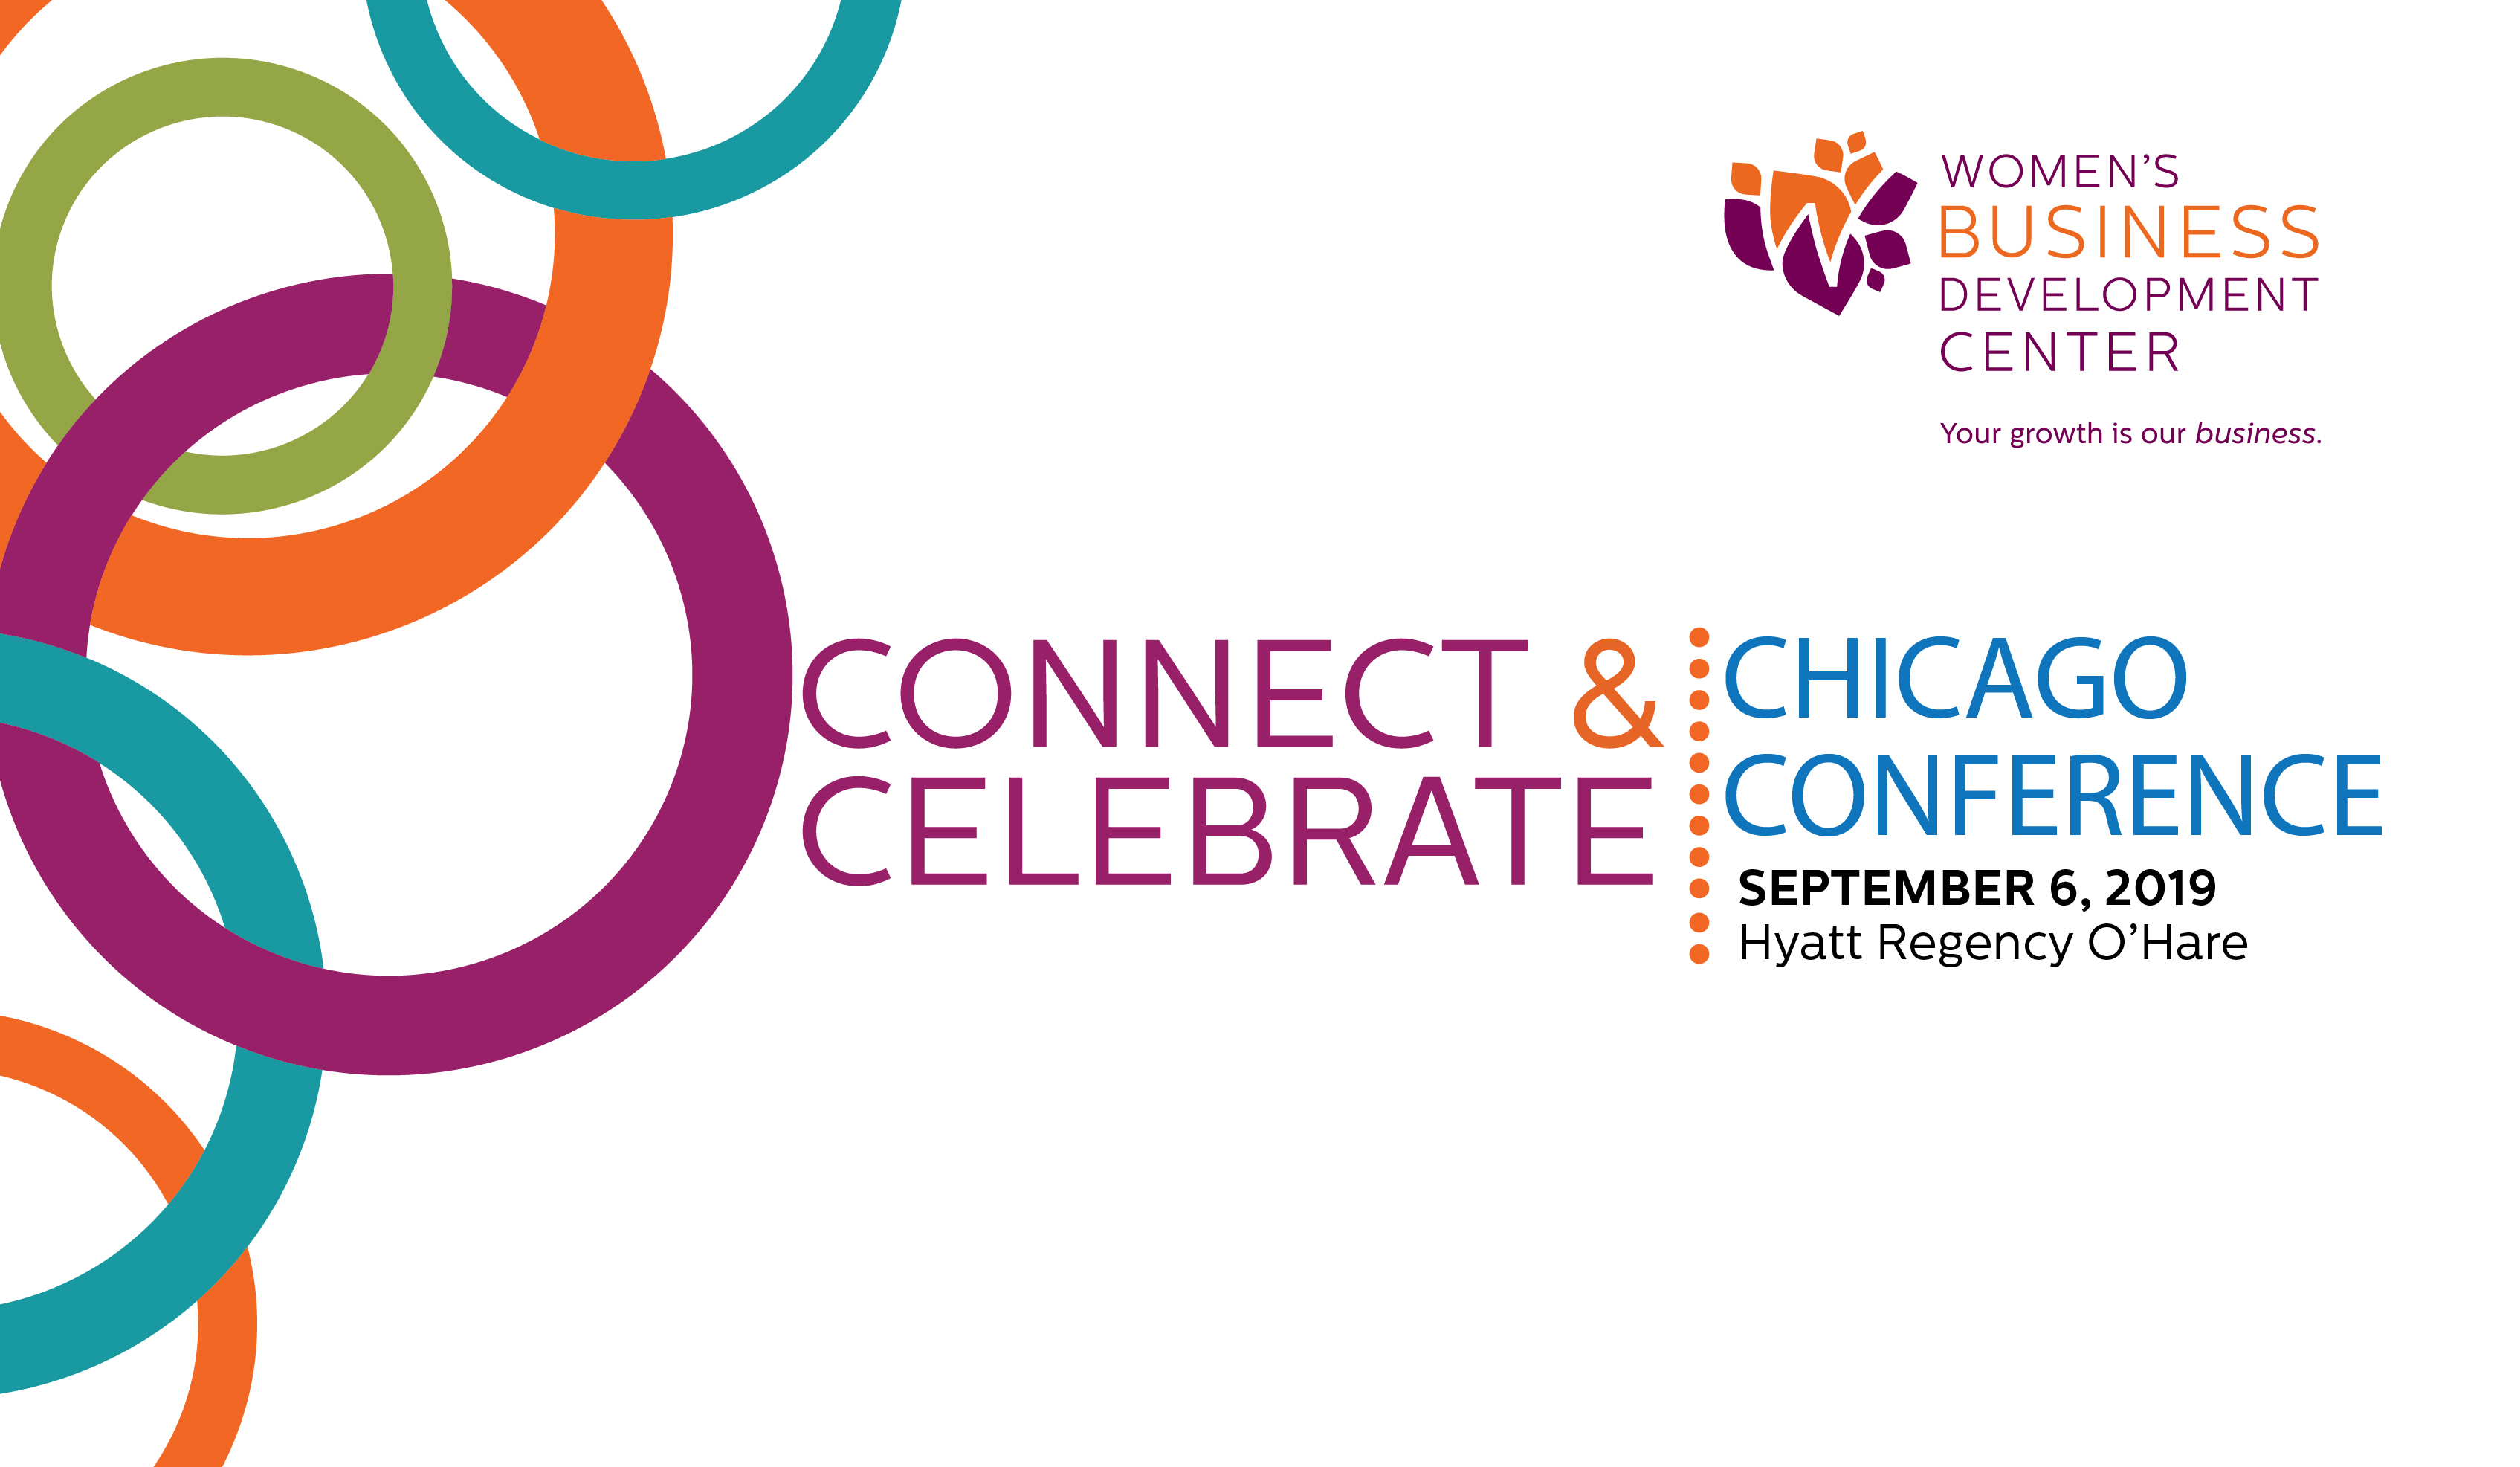 Connect & Celebrate: Chicago Signature Conference, Cook, Illinois, United States